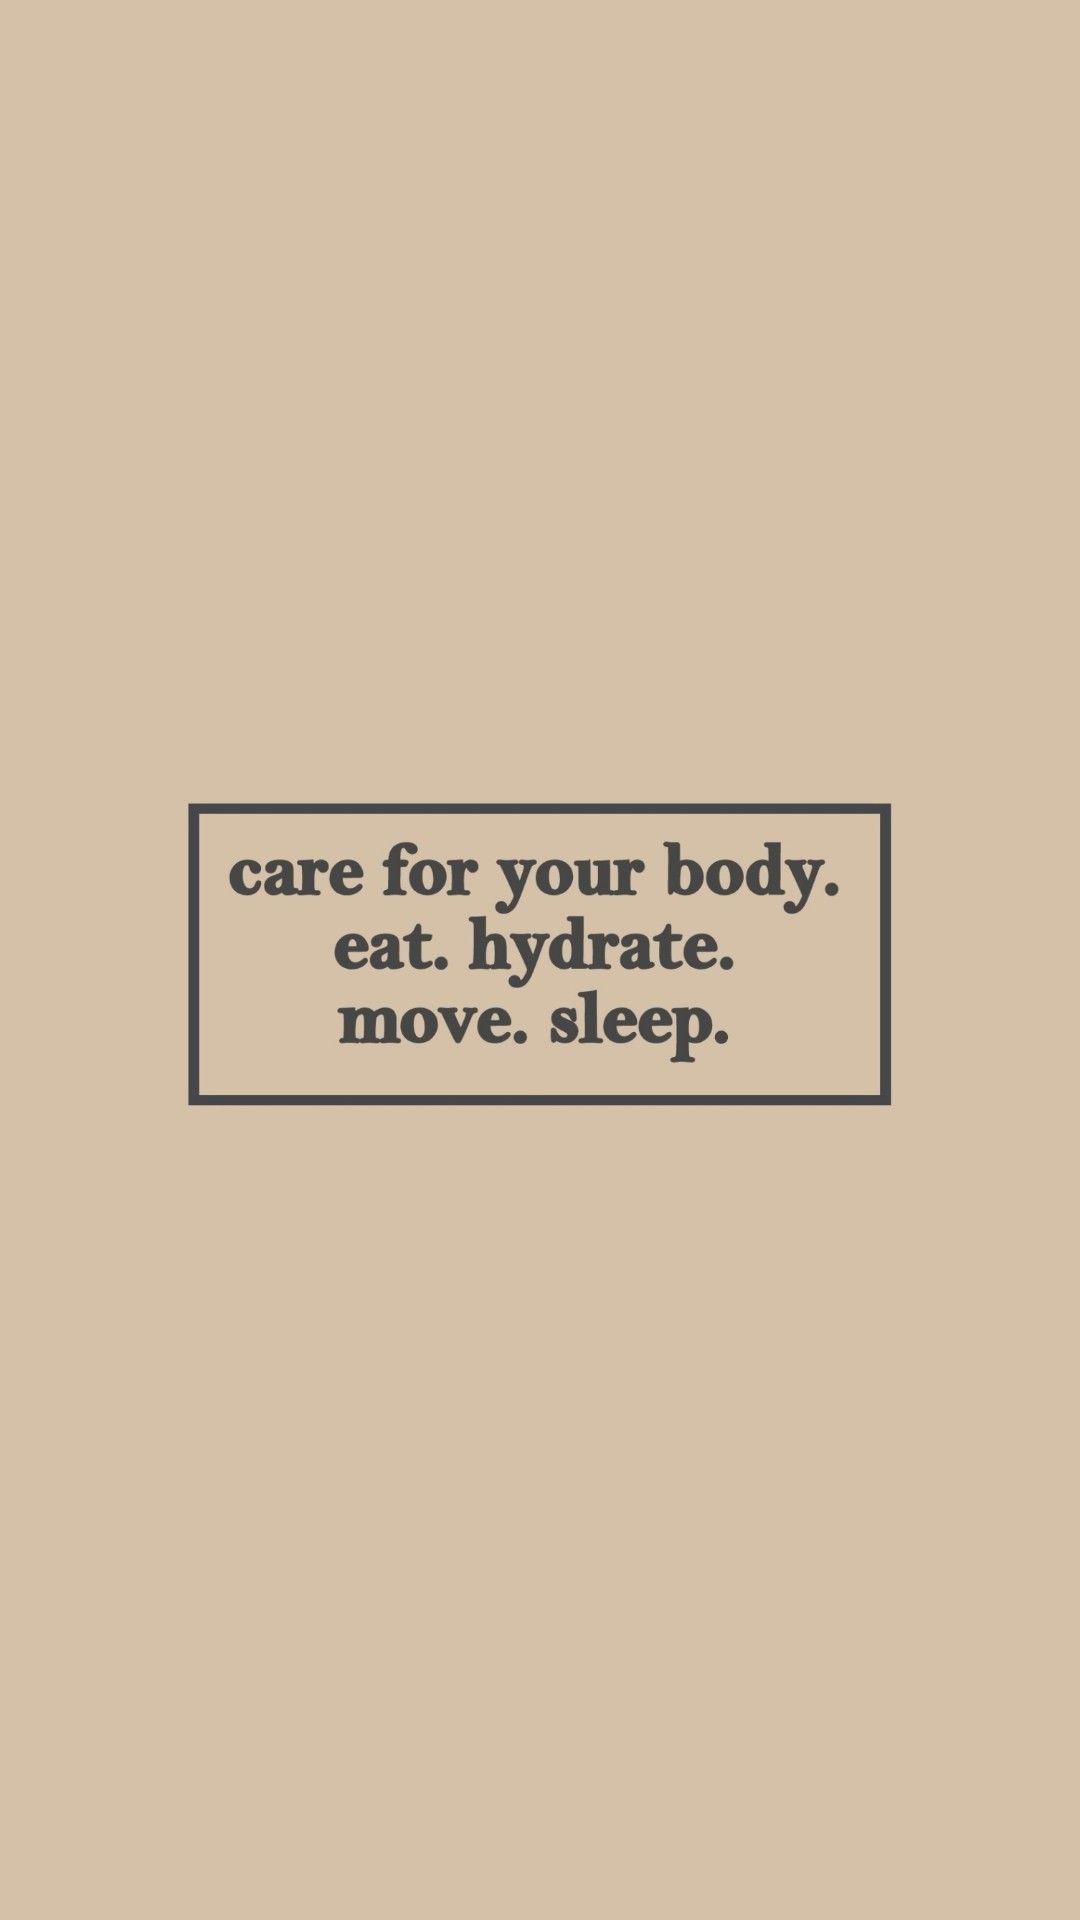 Care for your body. Eat. Hydrate. Move. Sleep. - Beige